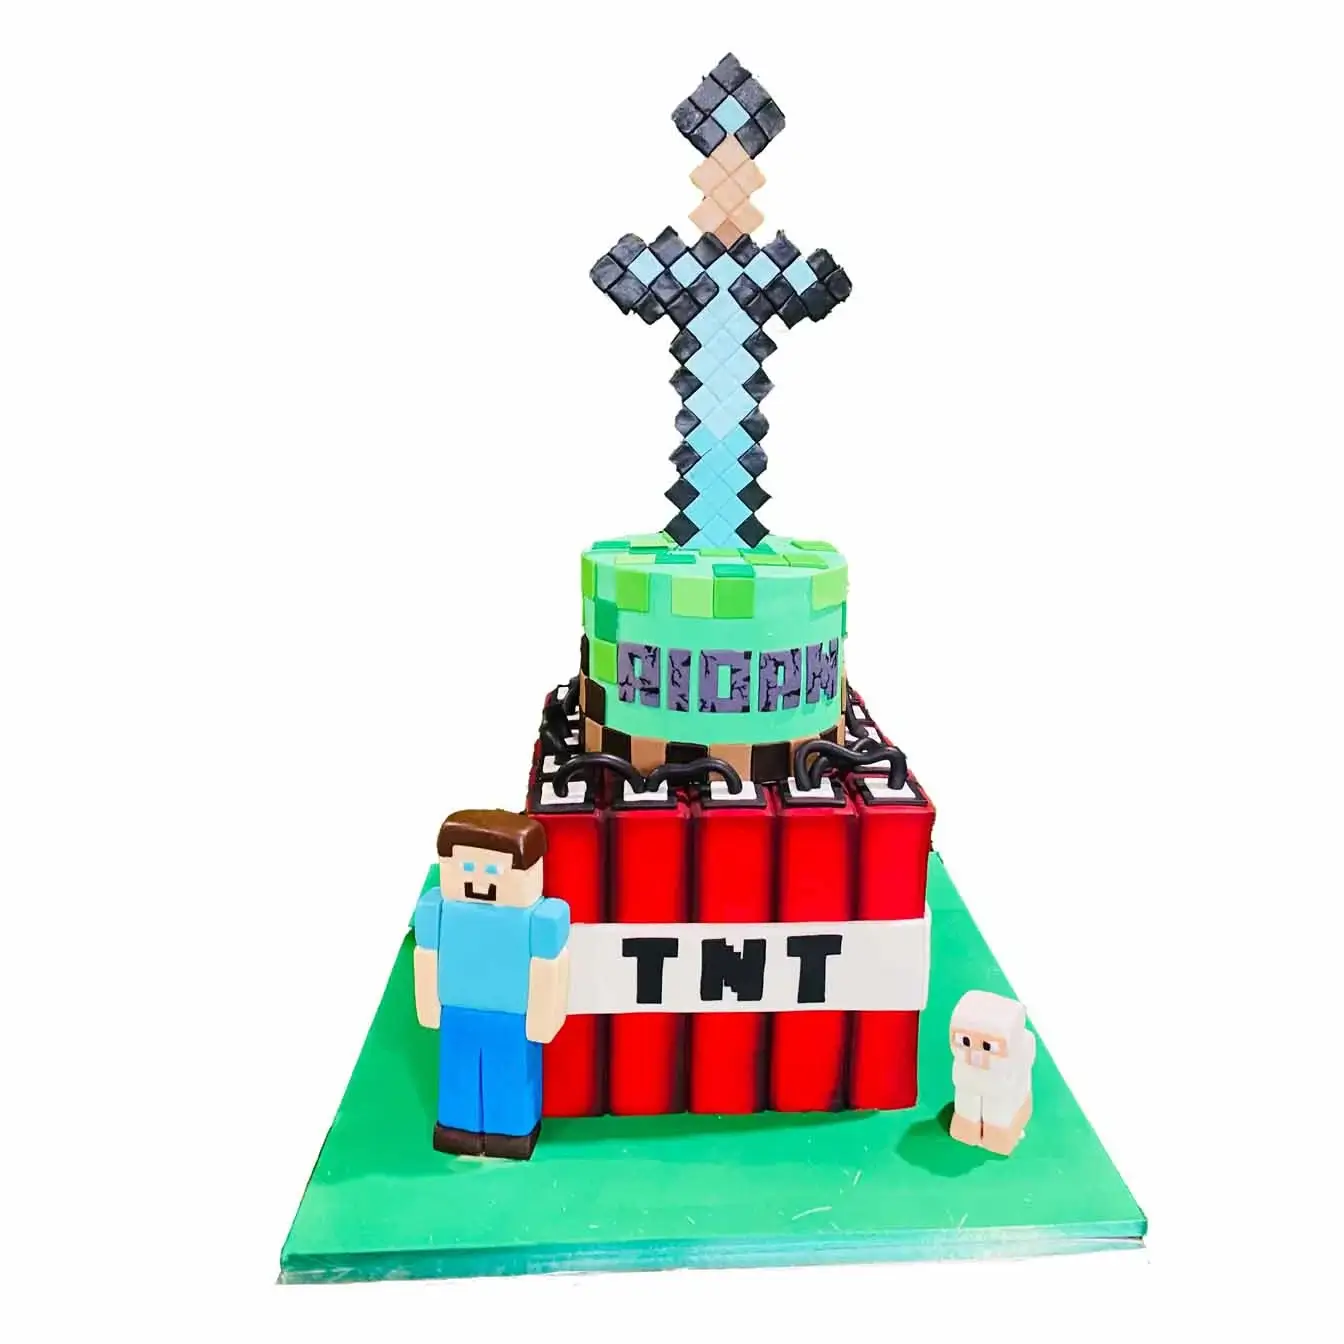 Minecraft Adventure Cake - A two-tier cake with a TNT bomb bottom tier, and a green Minecraft top tier with a blue sword, a pixel-perfect centerpiece for gaming-themed celebrations.